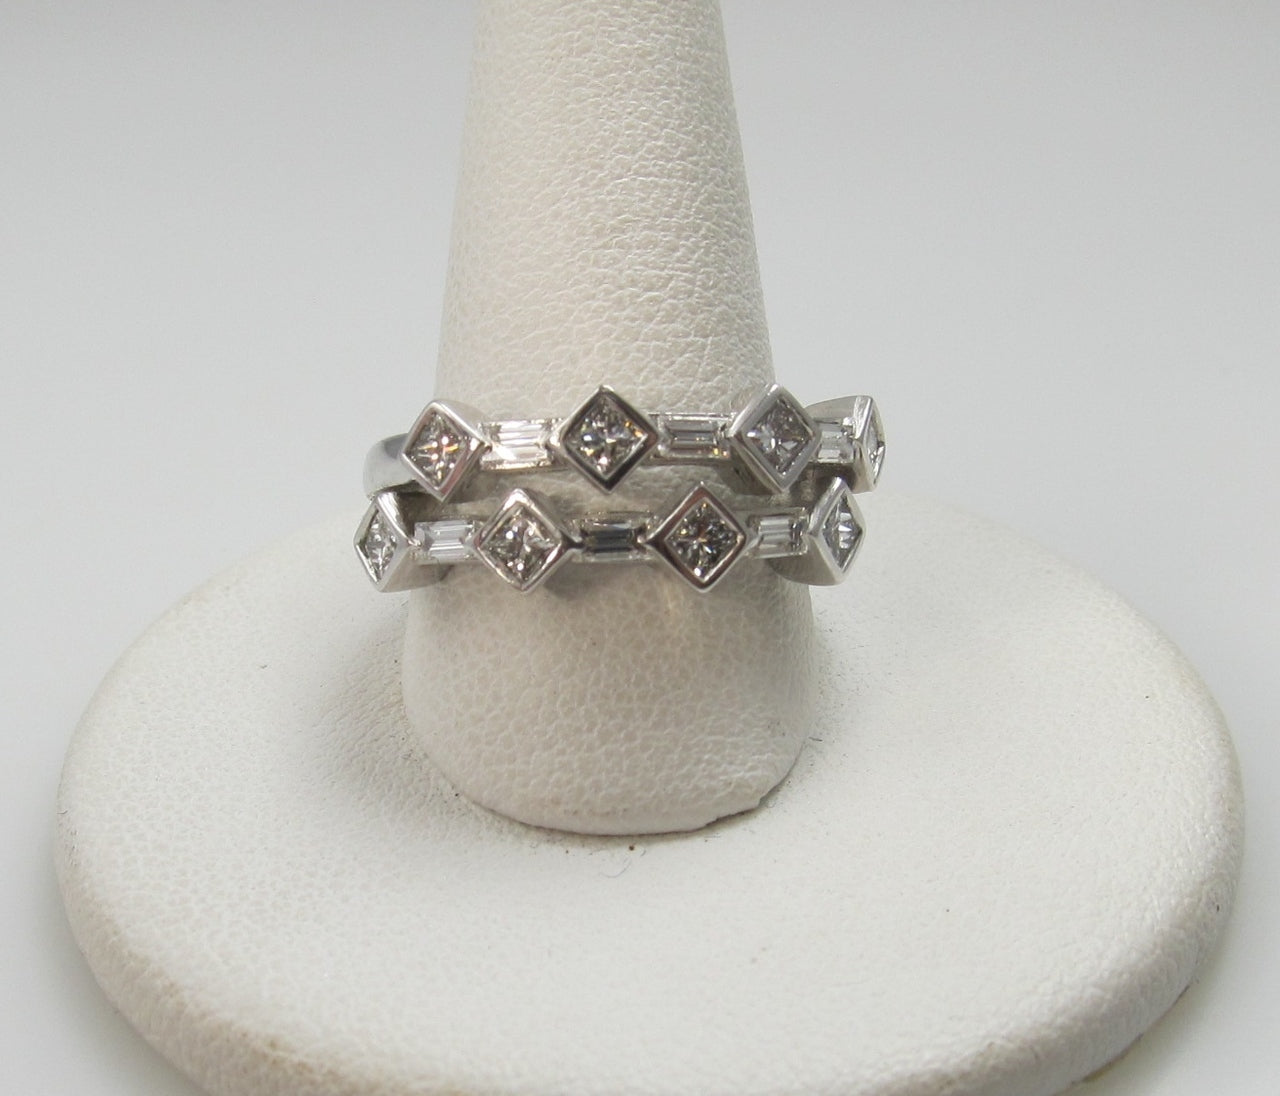 14k White Gold Ring With .85cts In Princess And Baguette Cut Diamonds.